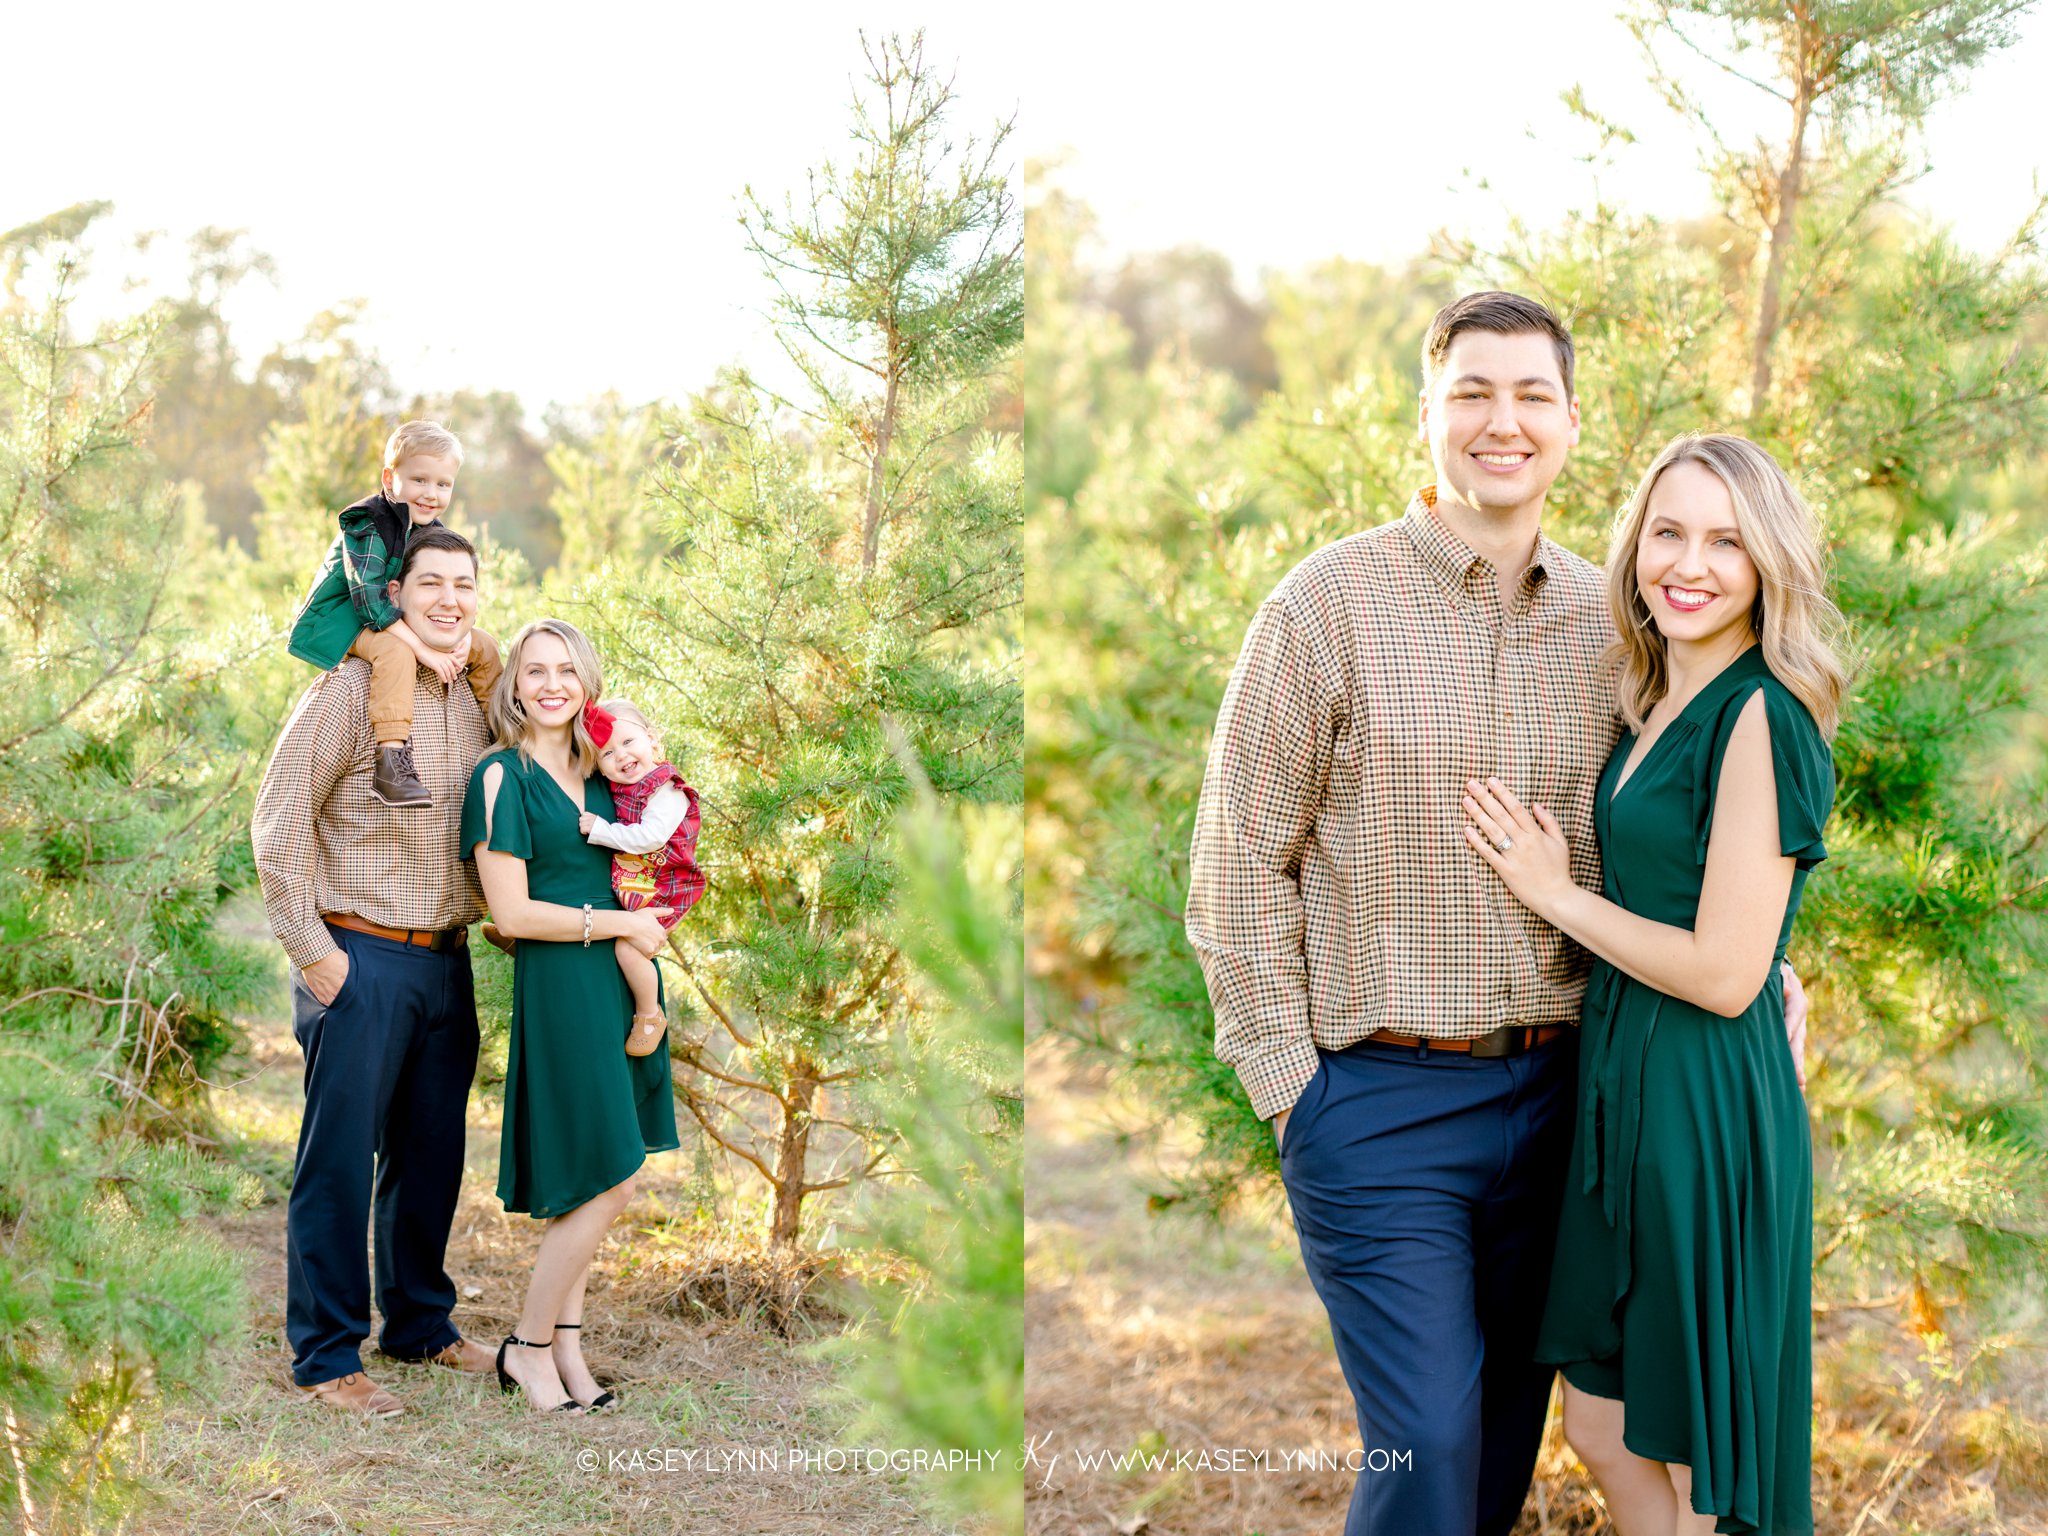 Holiday Family Session / Kasey Lynn Photography